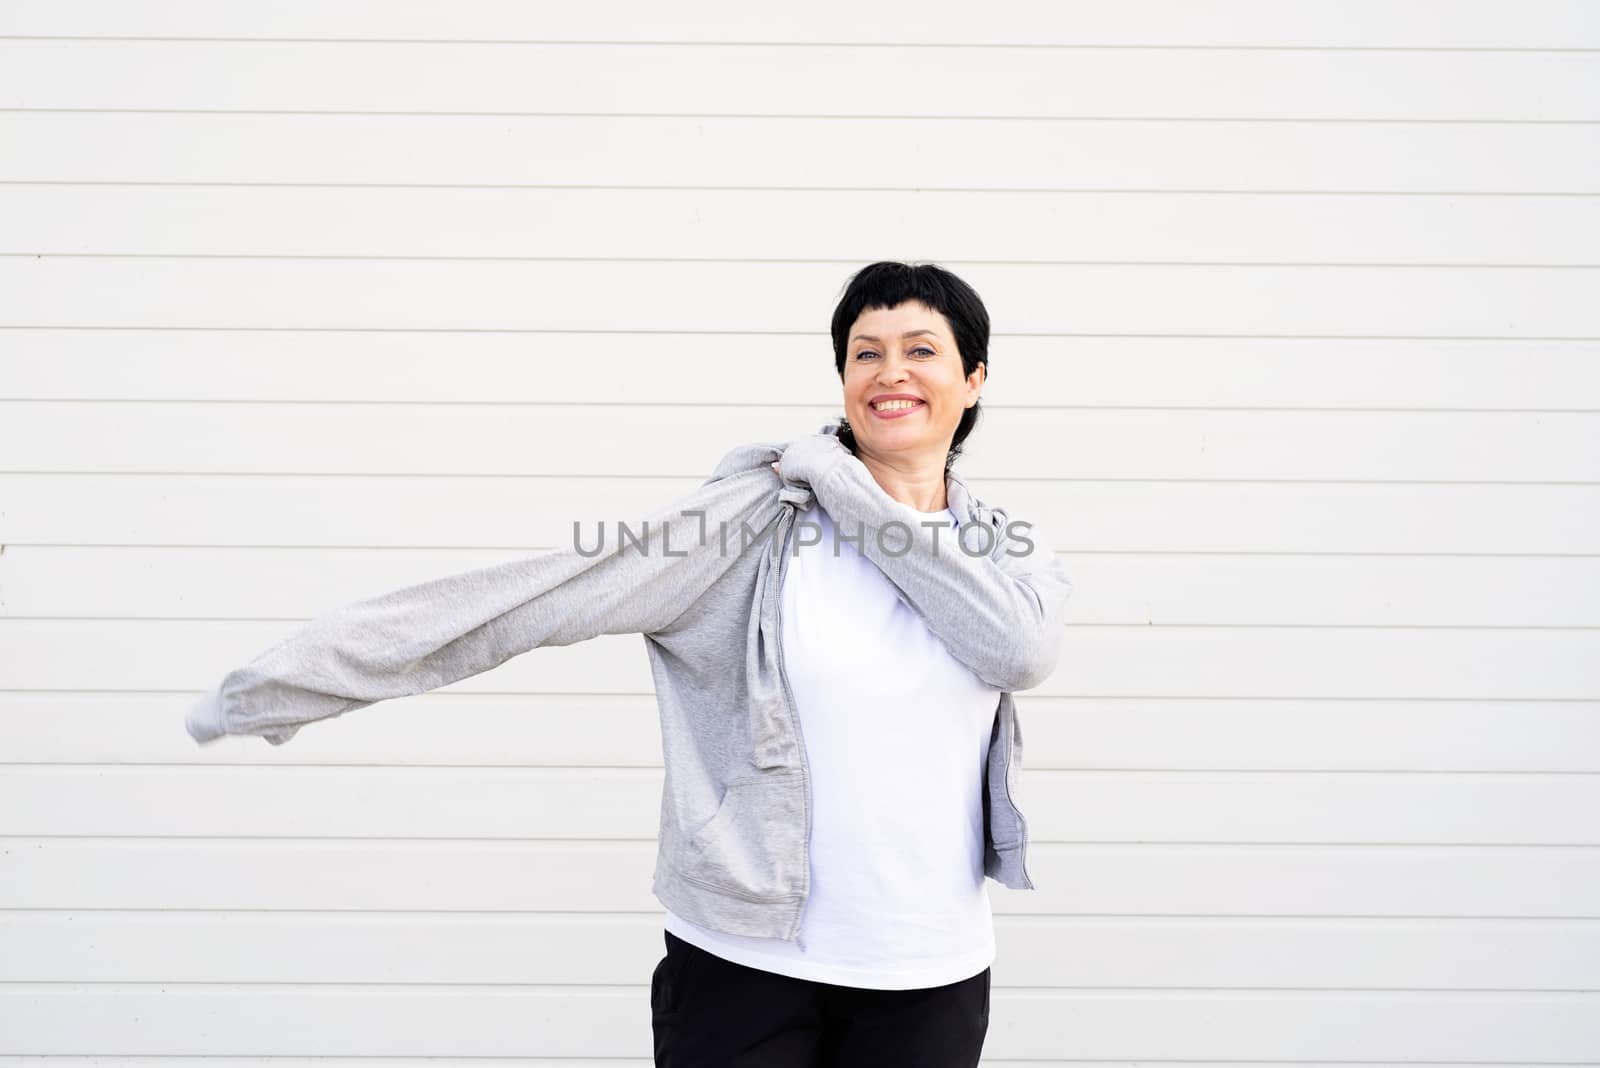 Sport and fitness. Senior sport. Active seniors. Senior woman waring gray jacket standing outdoors on gray solid background